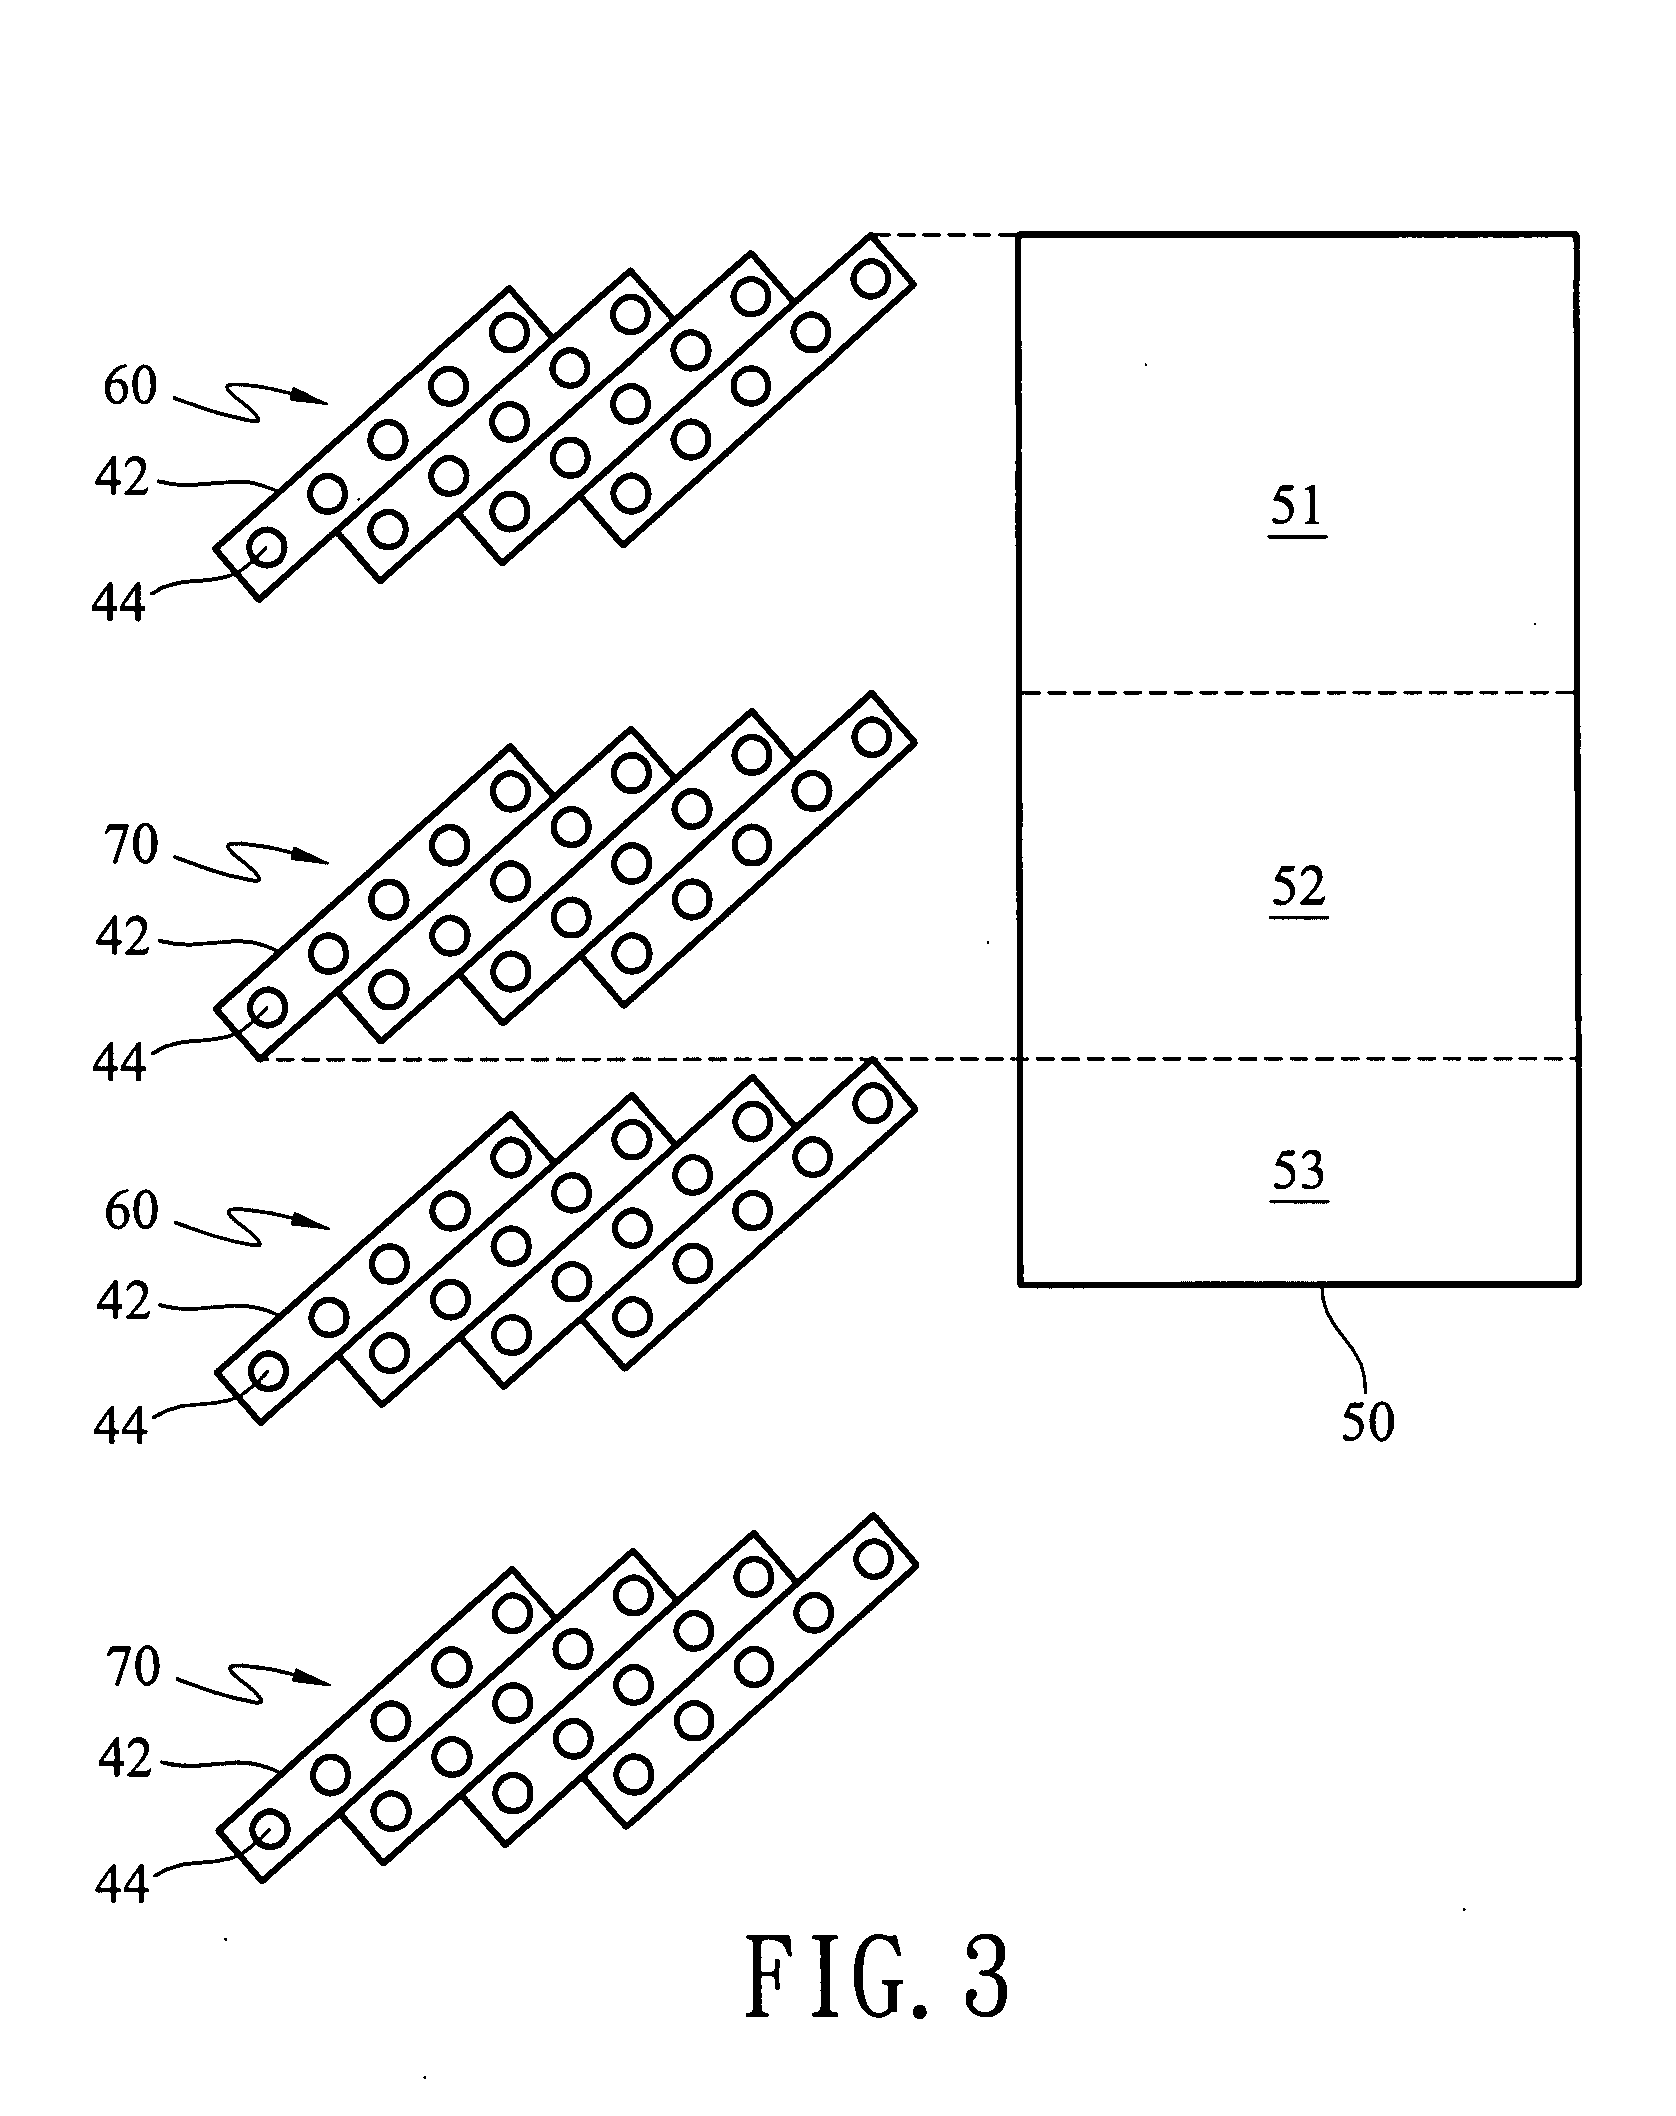 Printing data processing apparatus and method therefor